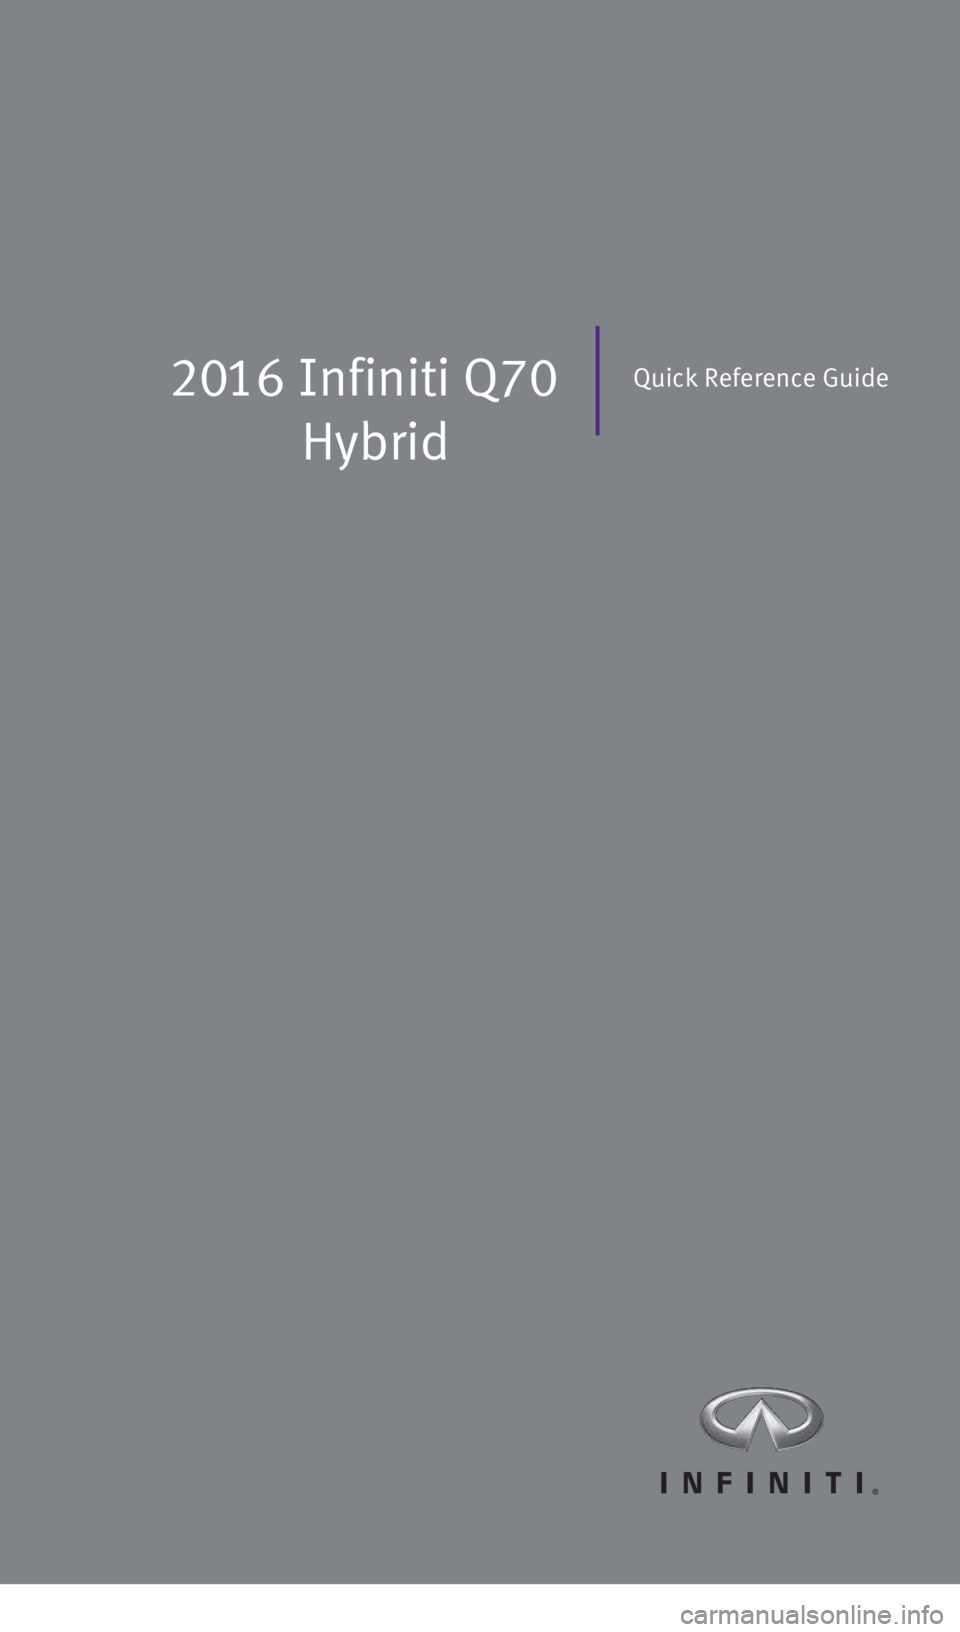 INFINITI Q70 HYBRID 2016  Quick Reference Guide 2016 Infiniti Q70
 HybridQuick Reference Guide
1932612_16a_Q70_HEV_US_pQRG_091715.indd   39/17/15   10:43 AM 